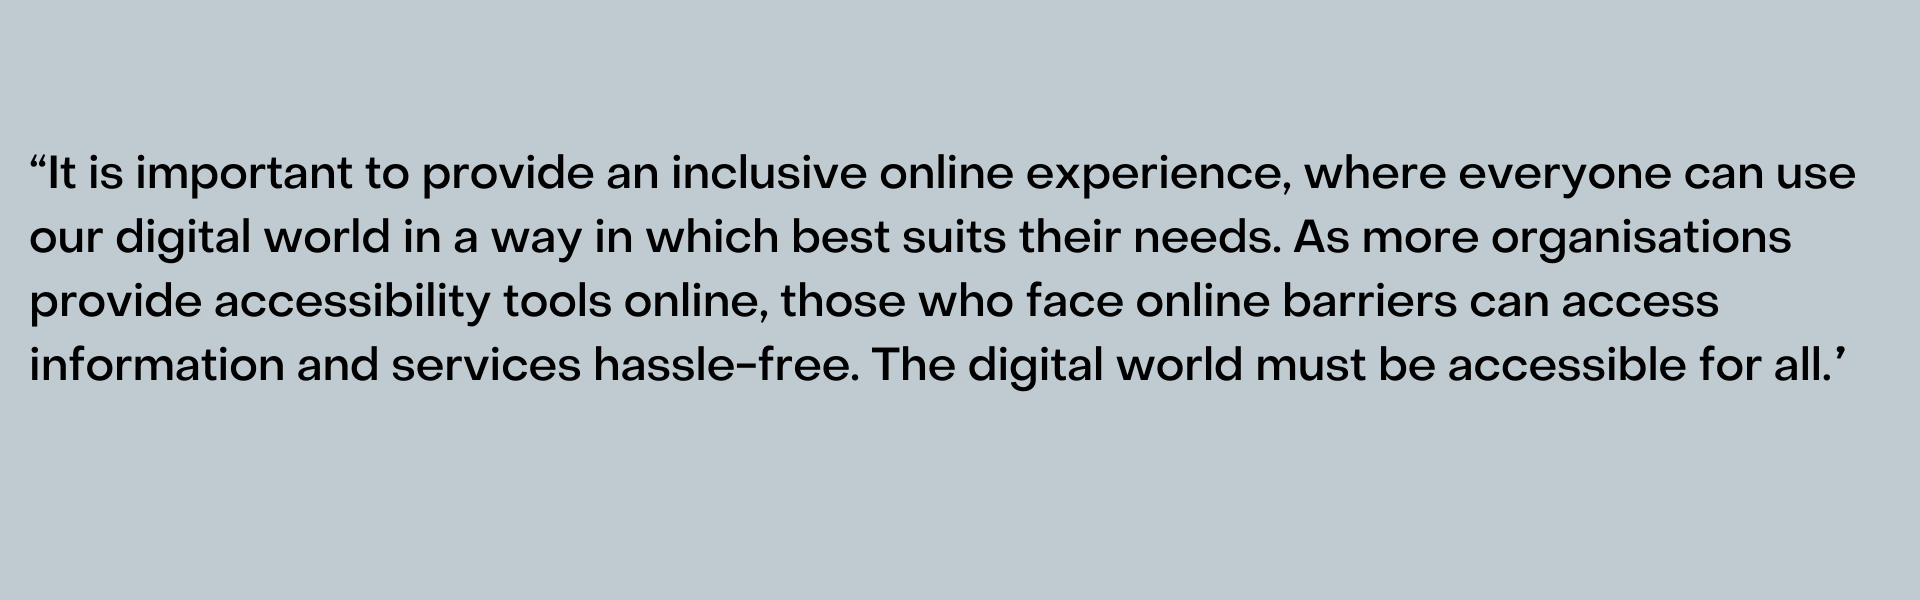 “It is important to provide an inclusive online experience, where everyone can use our digital world in a way in which best suits their needs. As more organisations provide accessibility tools online, those who face online barriers can access information and services hassle-free. The digital world must be accessible for all.”